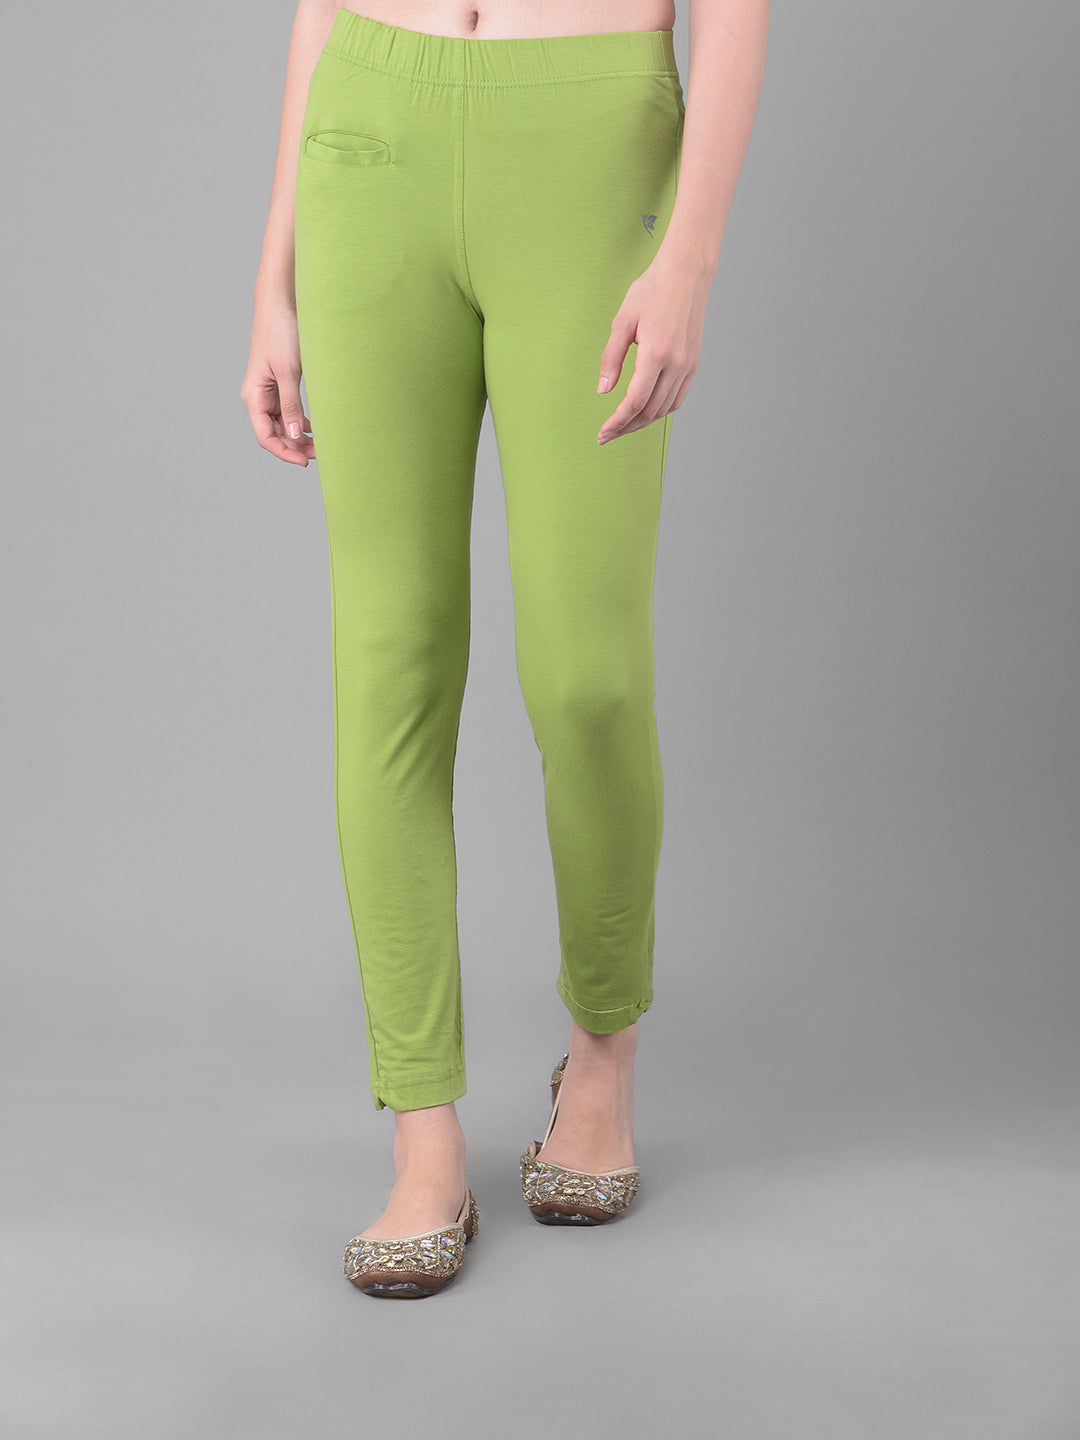 Yellow Solid Ankle Length Plus Legging - VALLES365 by S.C. - 4145009